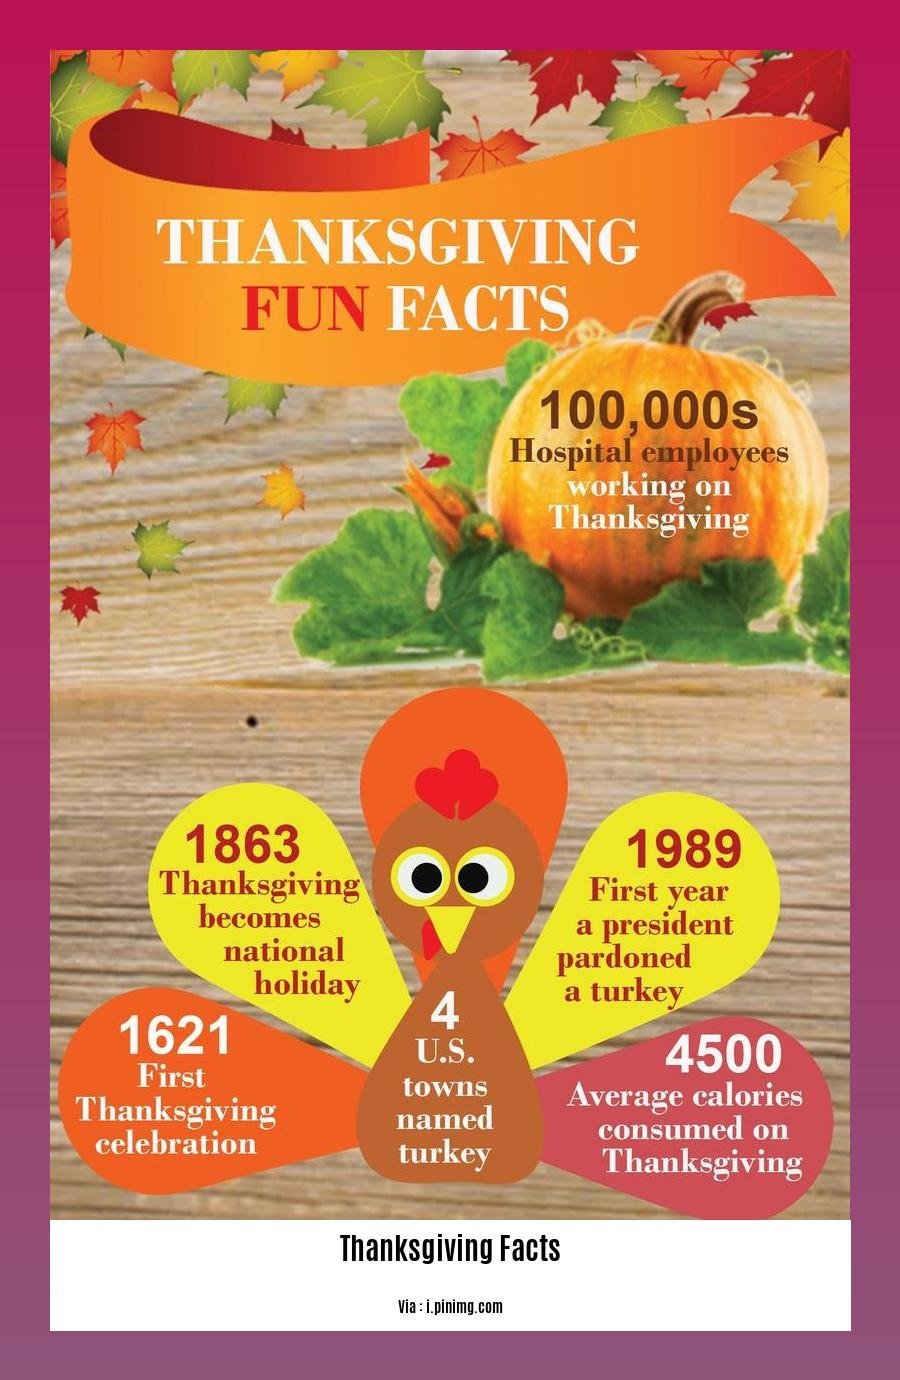 Canadian Thanksgiving facts and trivia